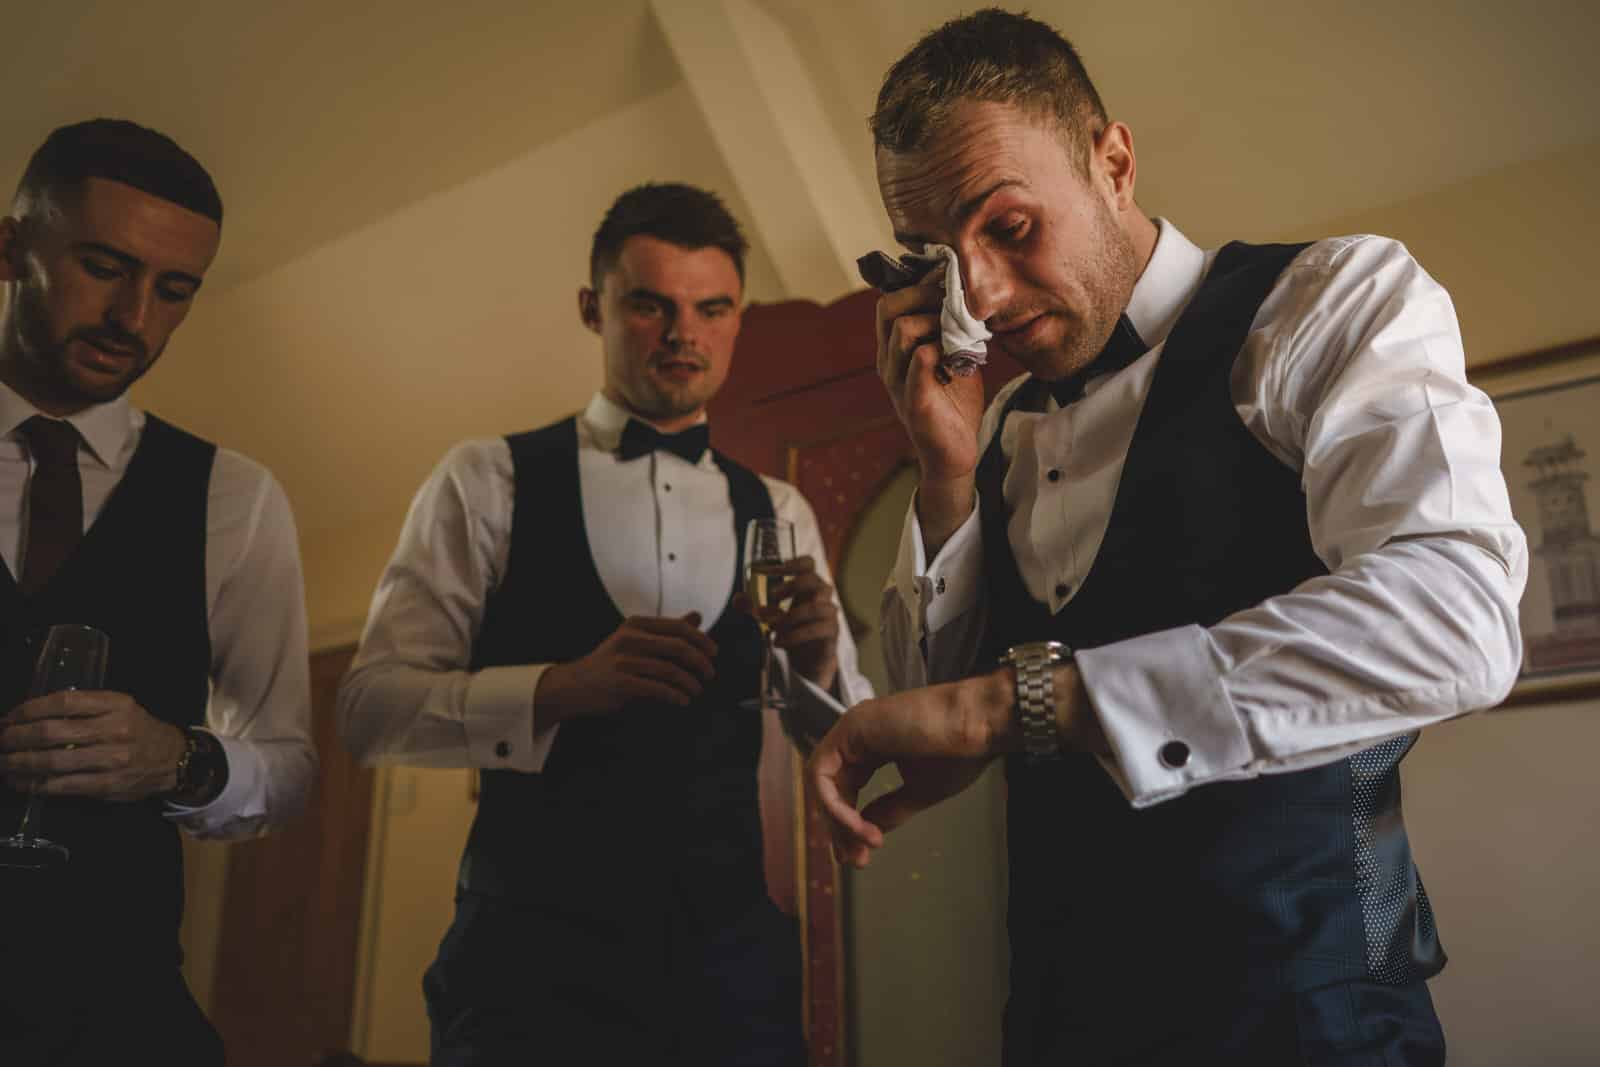 The groom is overcome with emotion as he looks down upon his gift from his beautiful bride